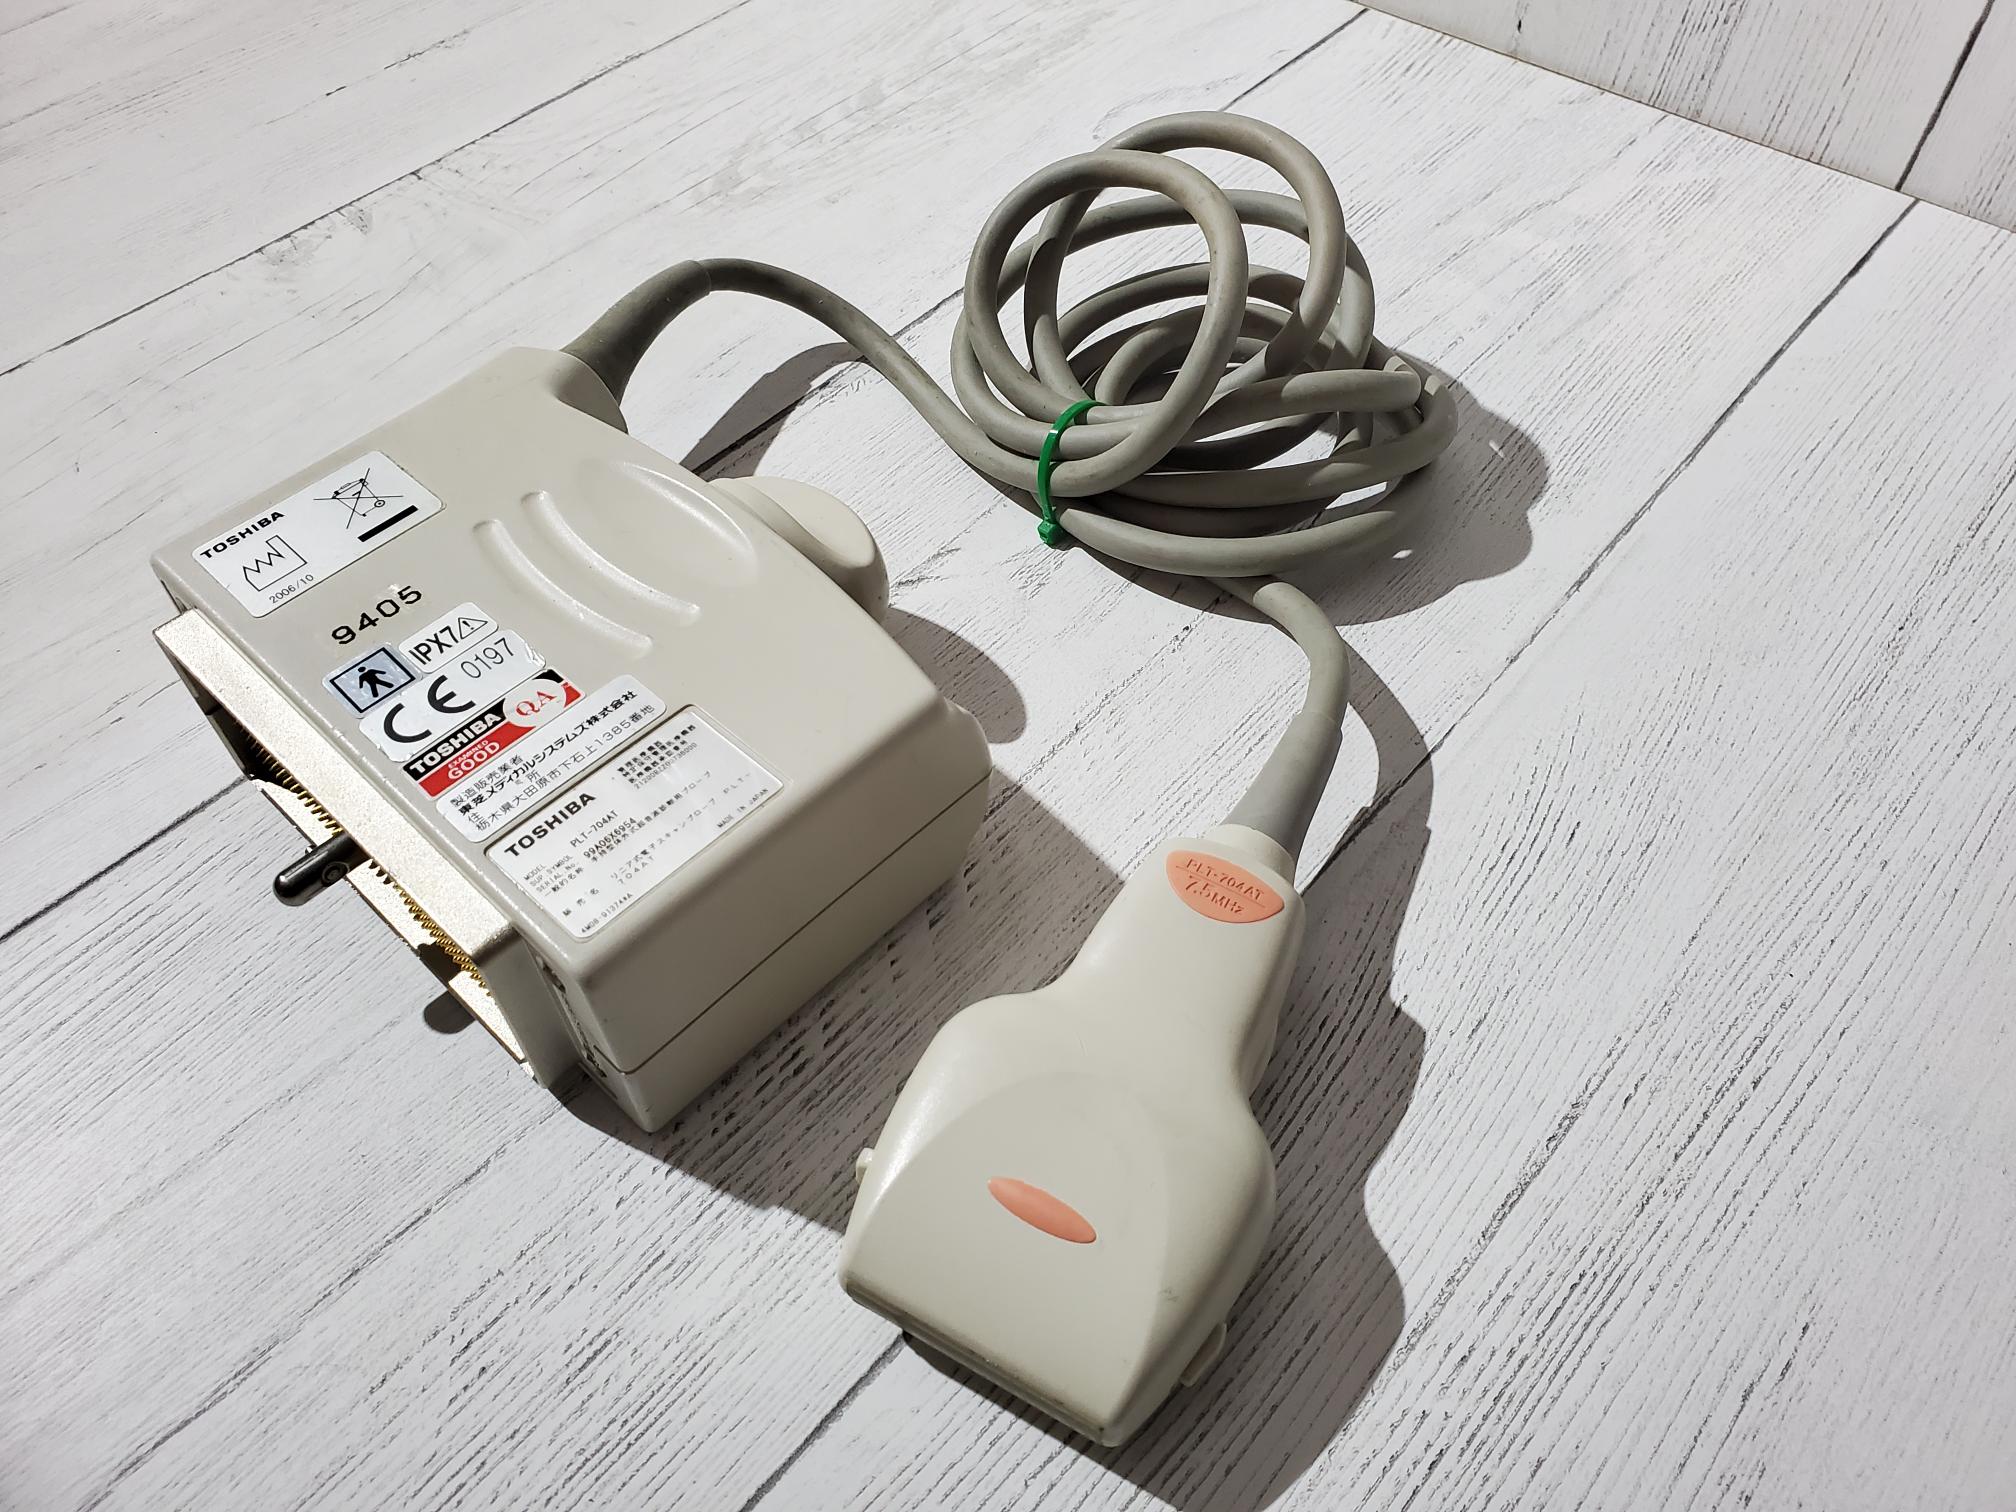 Ultrasound Probe TOSHIBA PLT-704AT Manufactured 2006 DIAGNOSTIC ULTRASOUND MACHINES FOR SALE